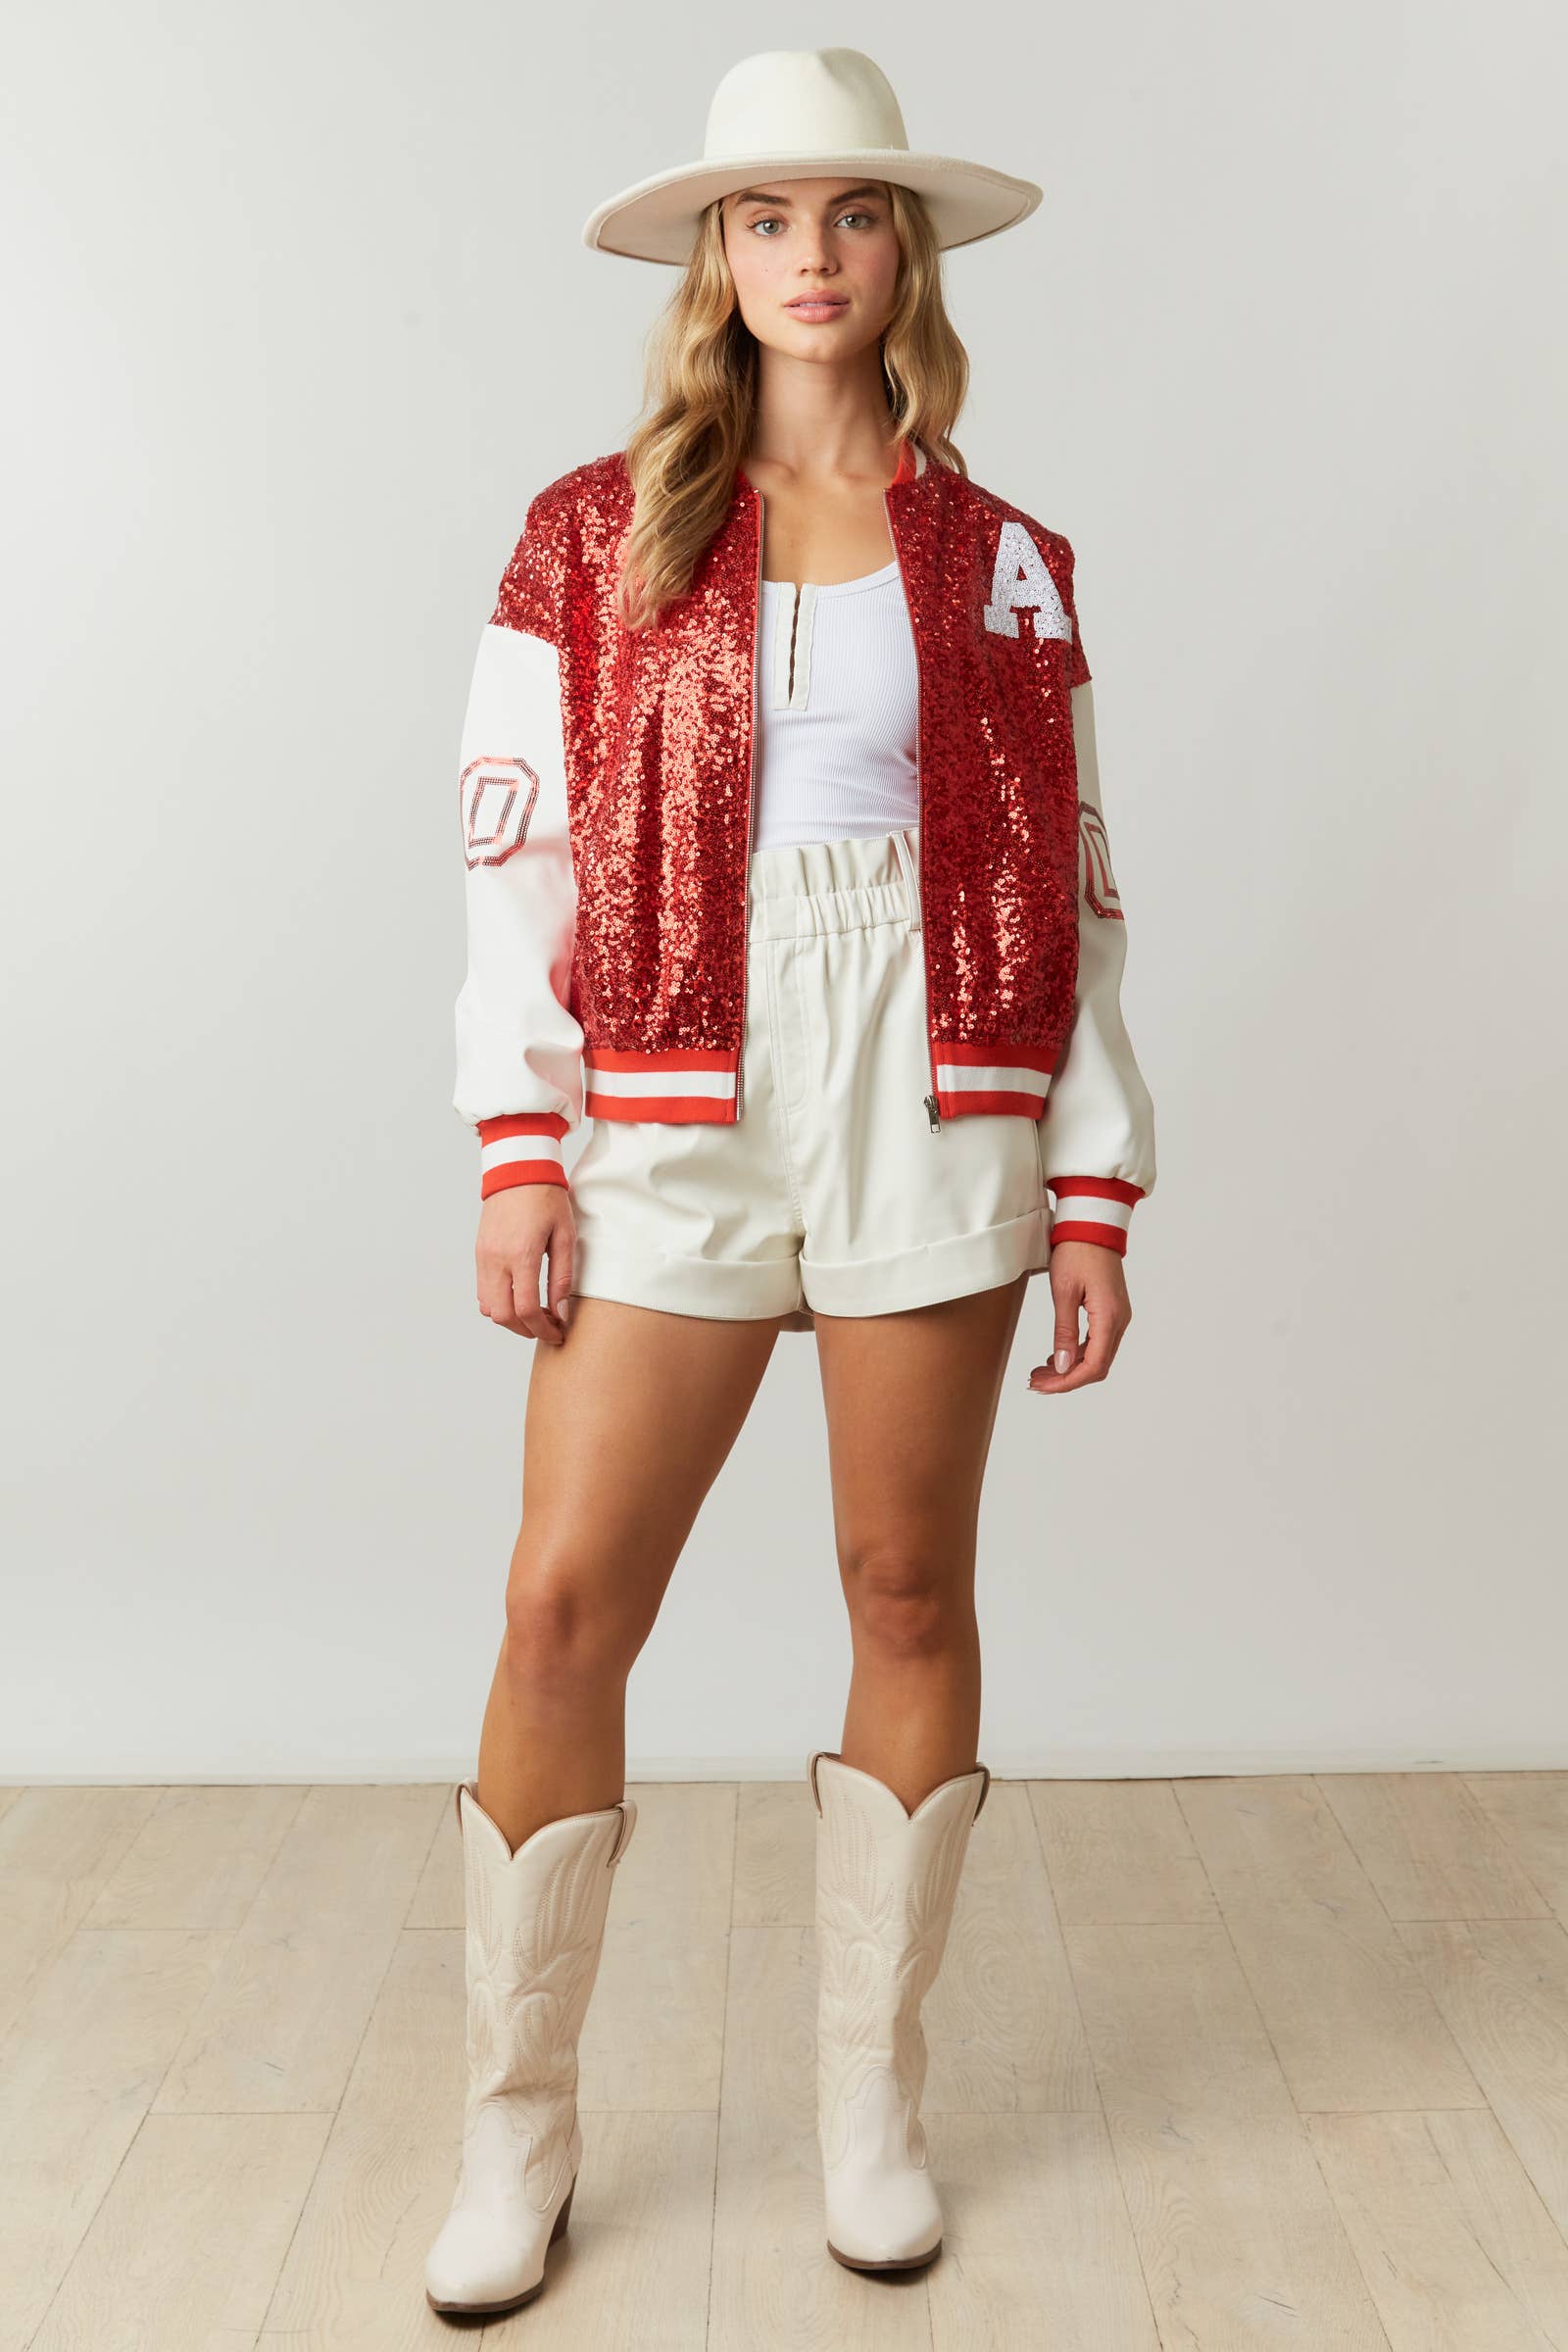 Sequin Baseball Jacket - IFJ63421-01: RED/WHITE / S - Pretty Crafty Lady Shop